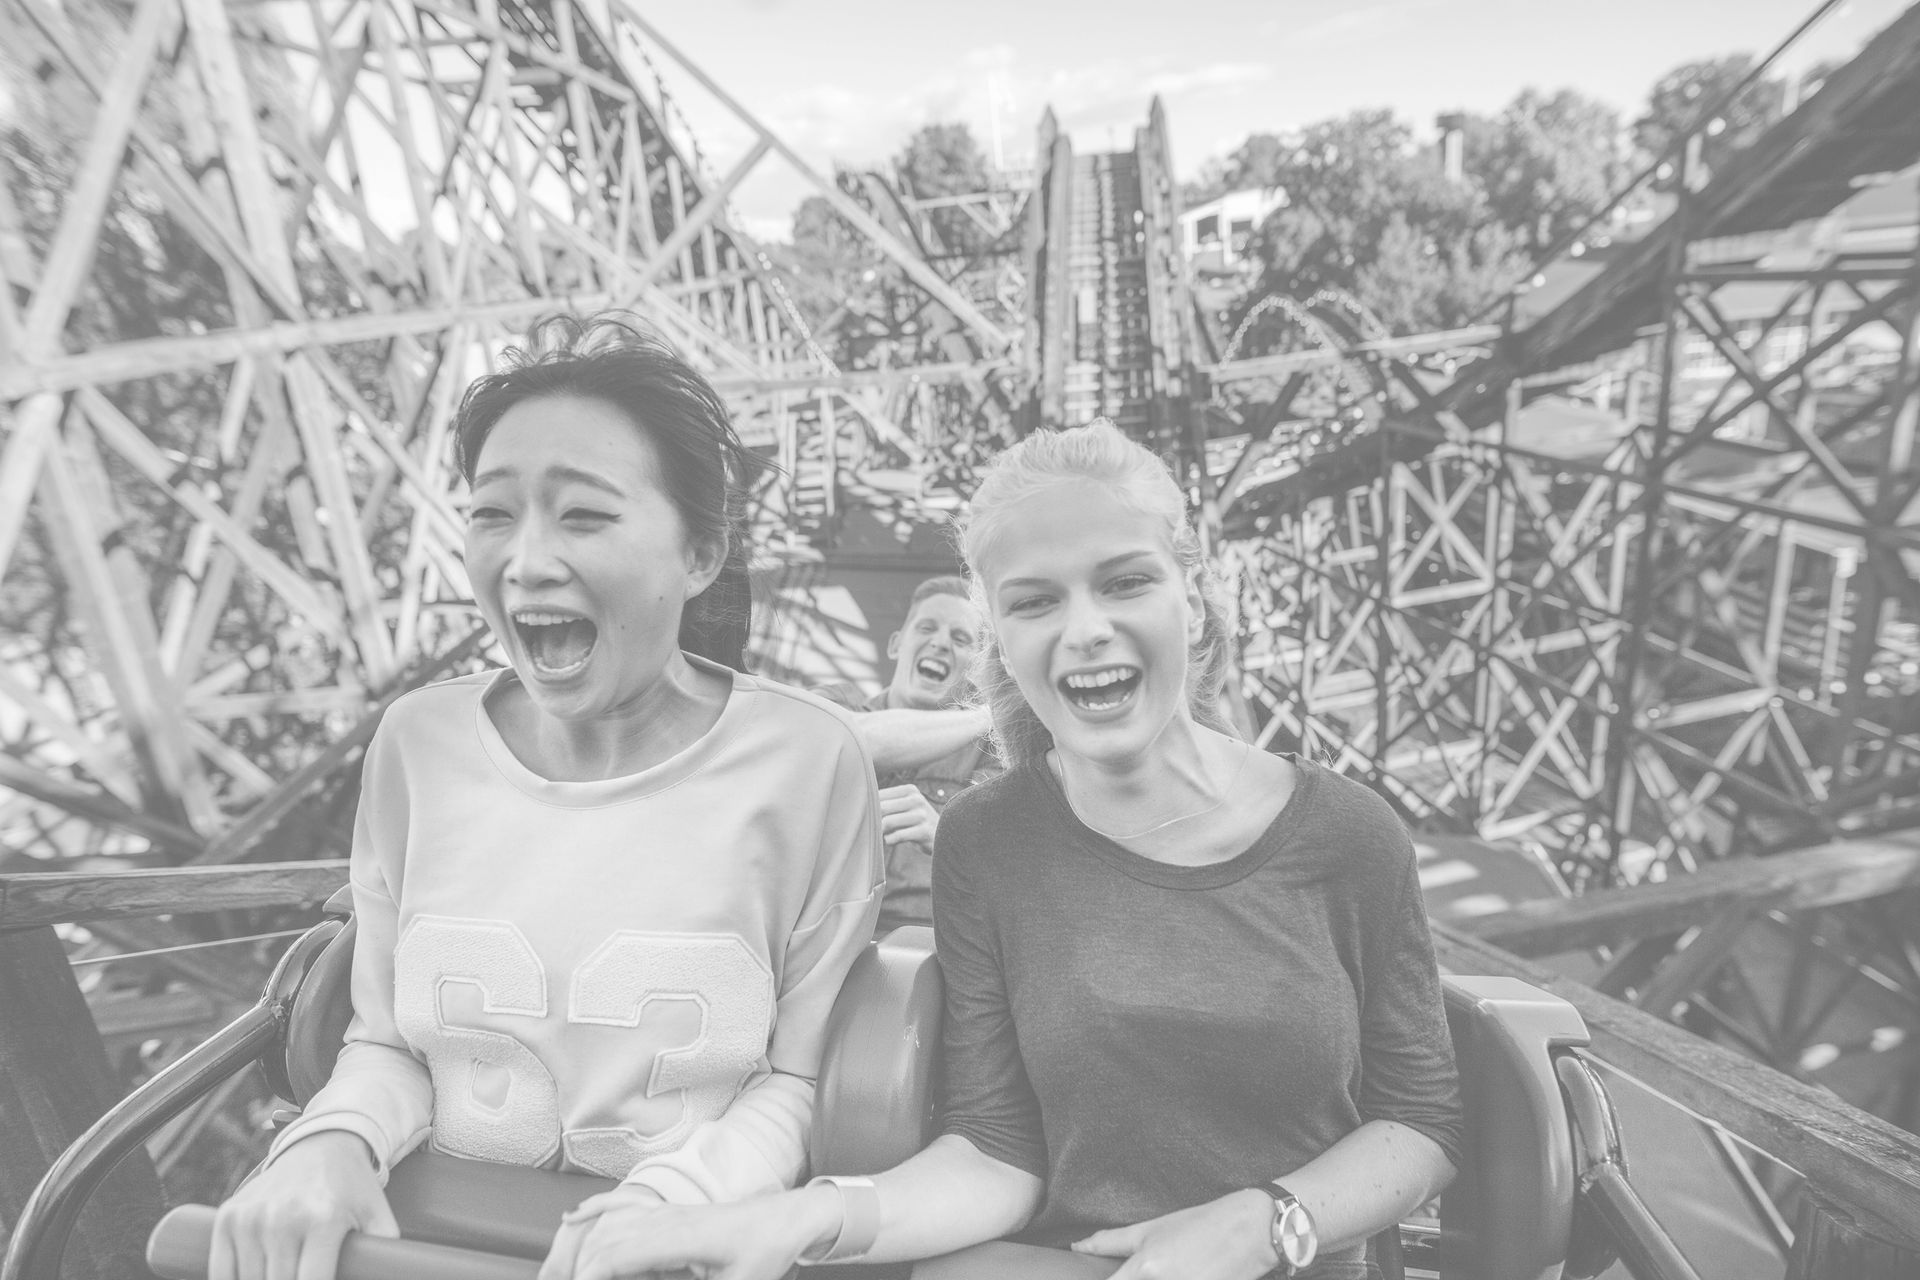 A photograph of  a roller coaster ride to show how it can feel owning a small business